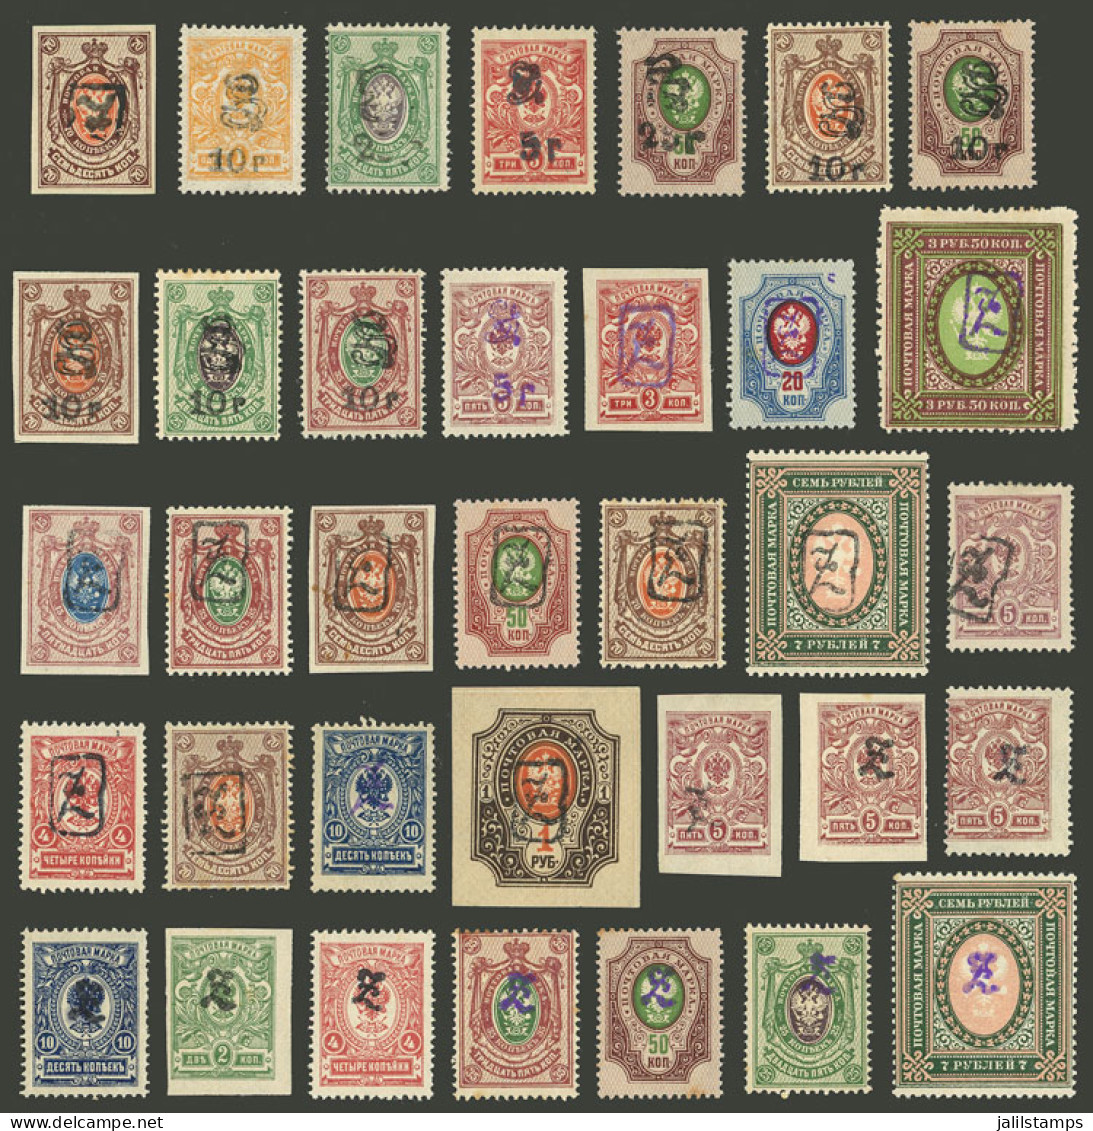 ARMENIA: Interesting Lot Of Russia Stamps Overprinted In 1919, Including One Inverted Overprint And 2 Or 3 Uncatalogued  - Armenië